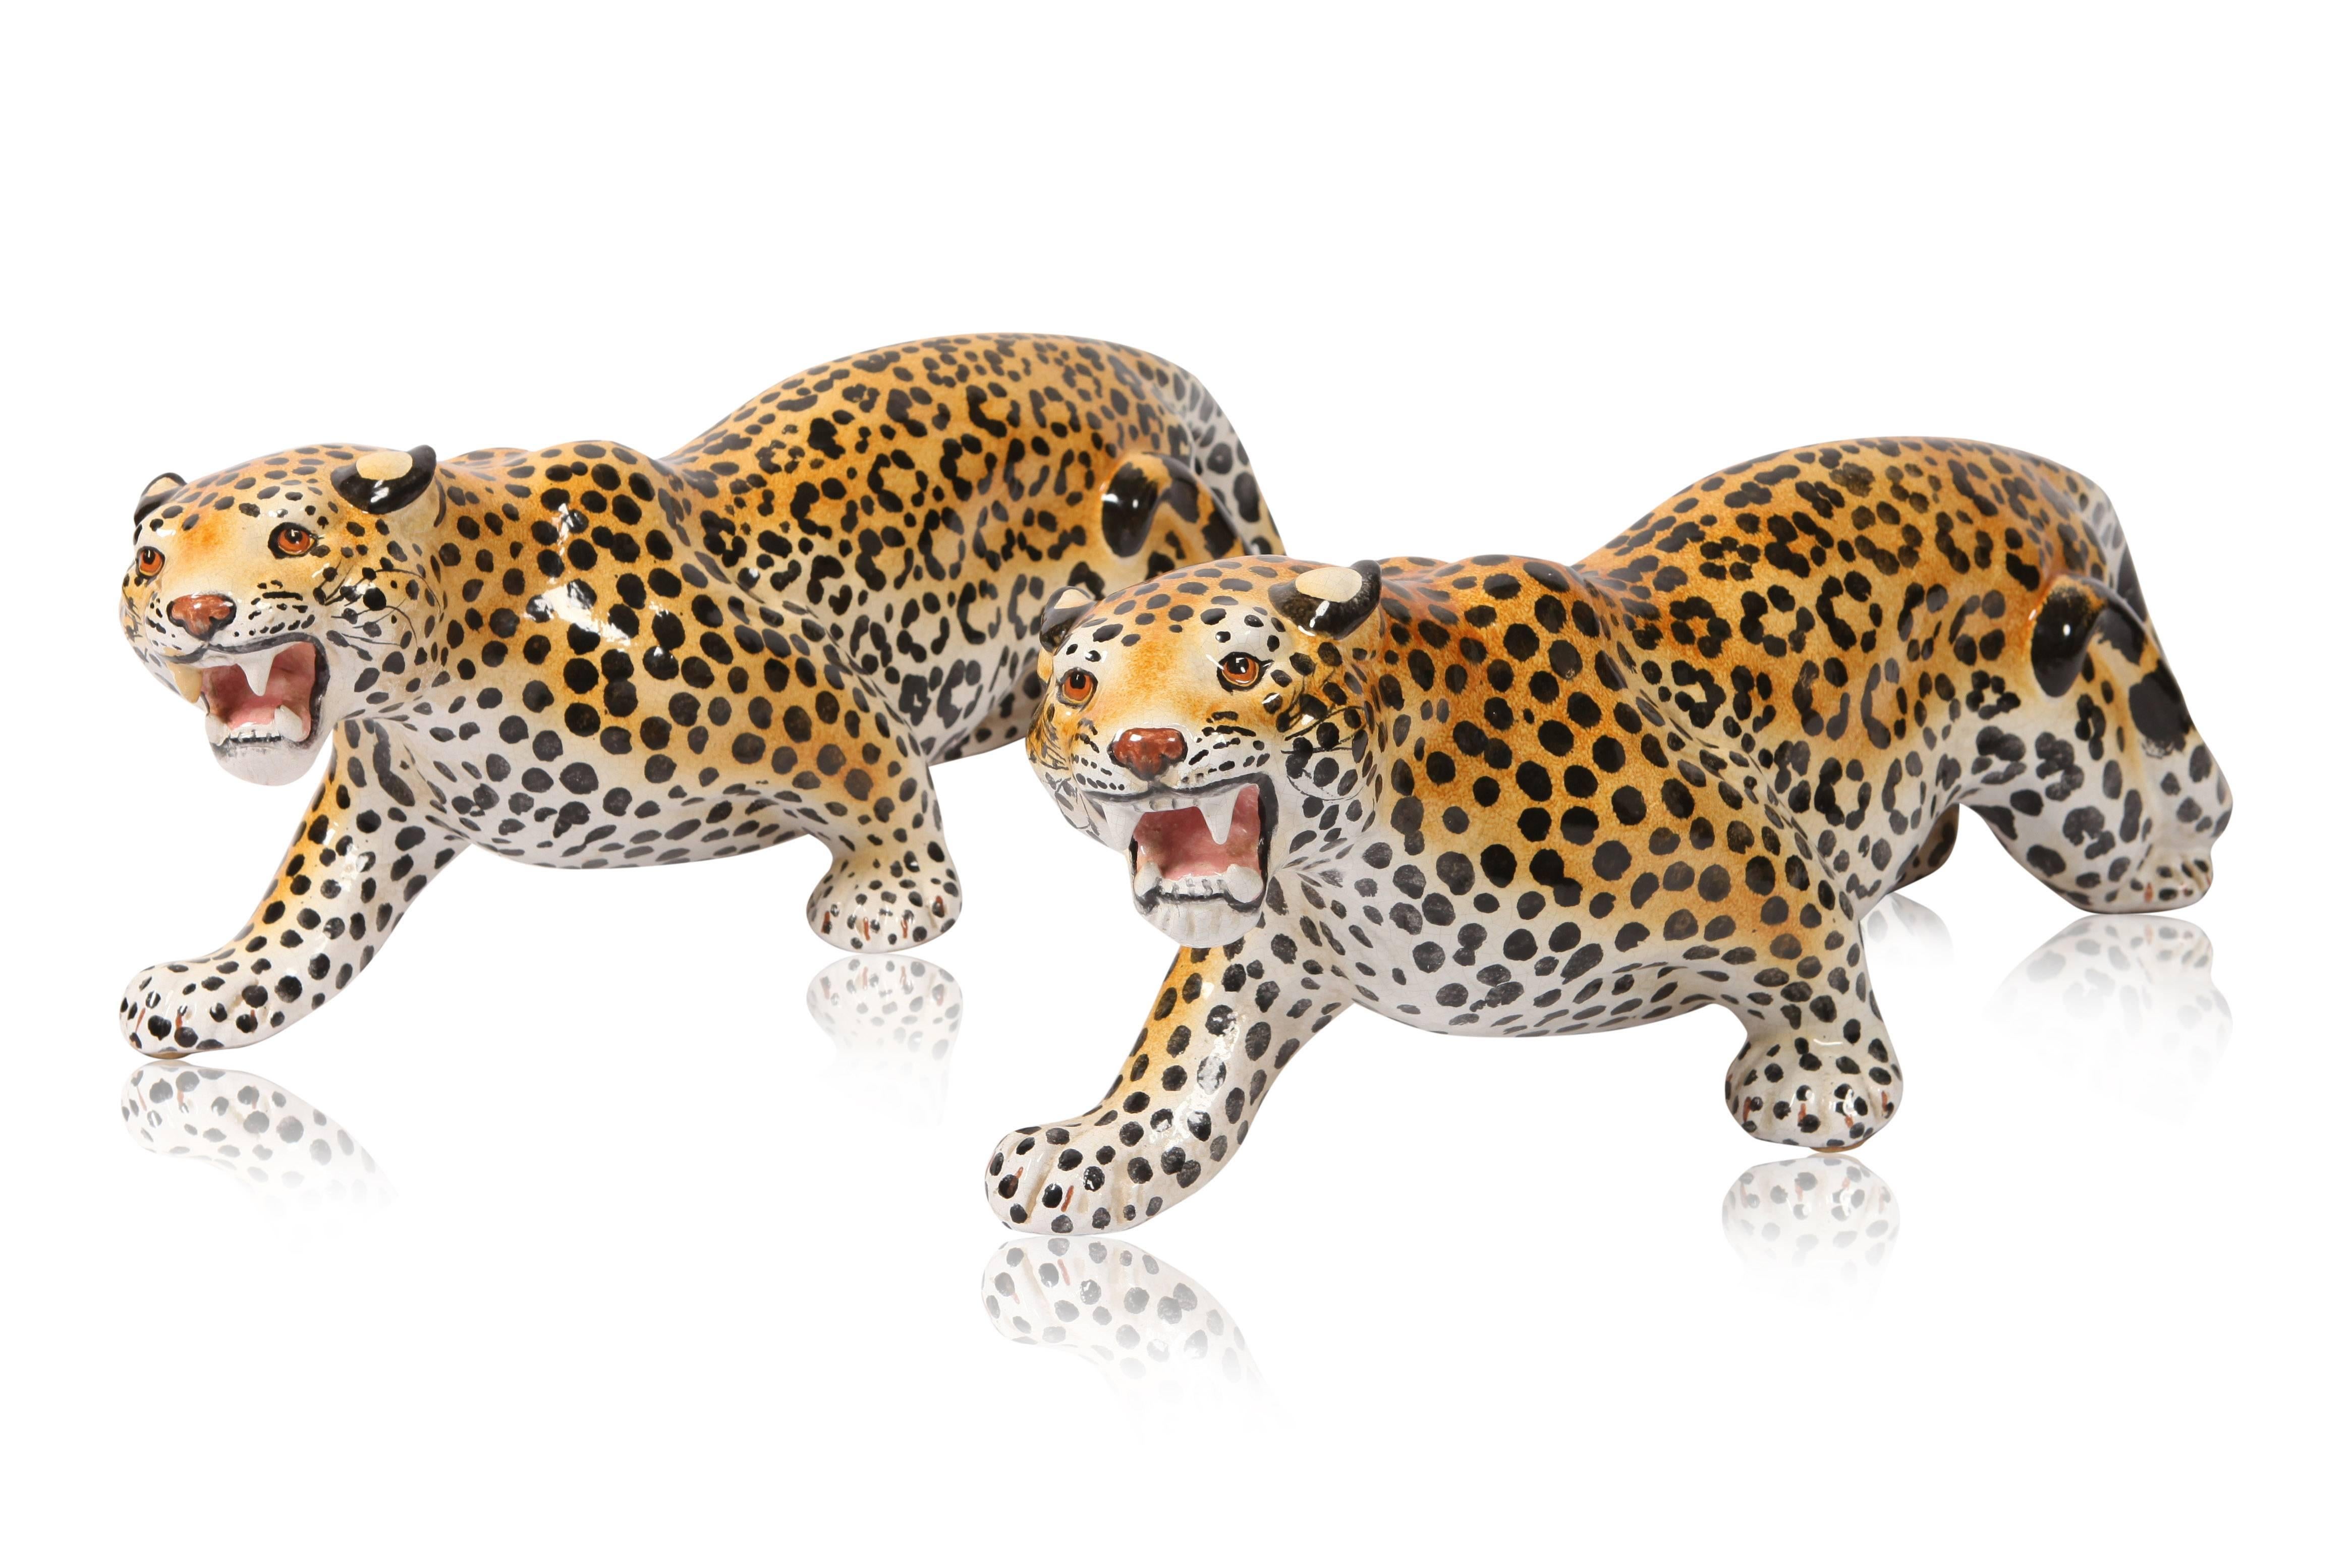 hand-painted ceramic leopard sculptures, Italy 1970s

It's a set of two identical porcelain pieces
would fit well in a regency inspired tropical gabriella creeps style interior
Check out our Goldwood storefront for more matching pieces